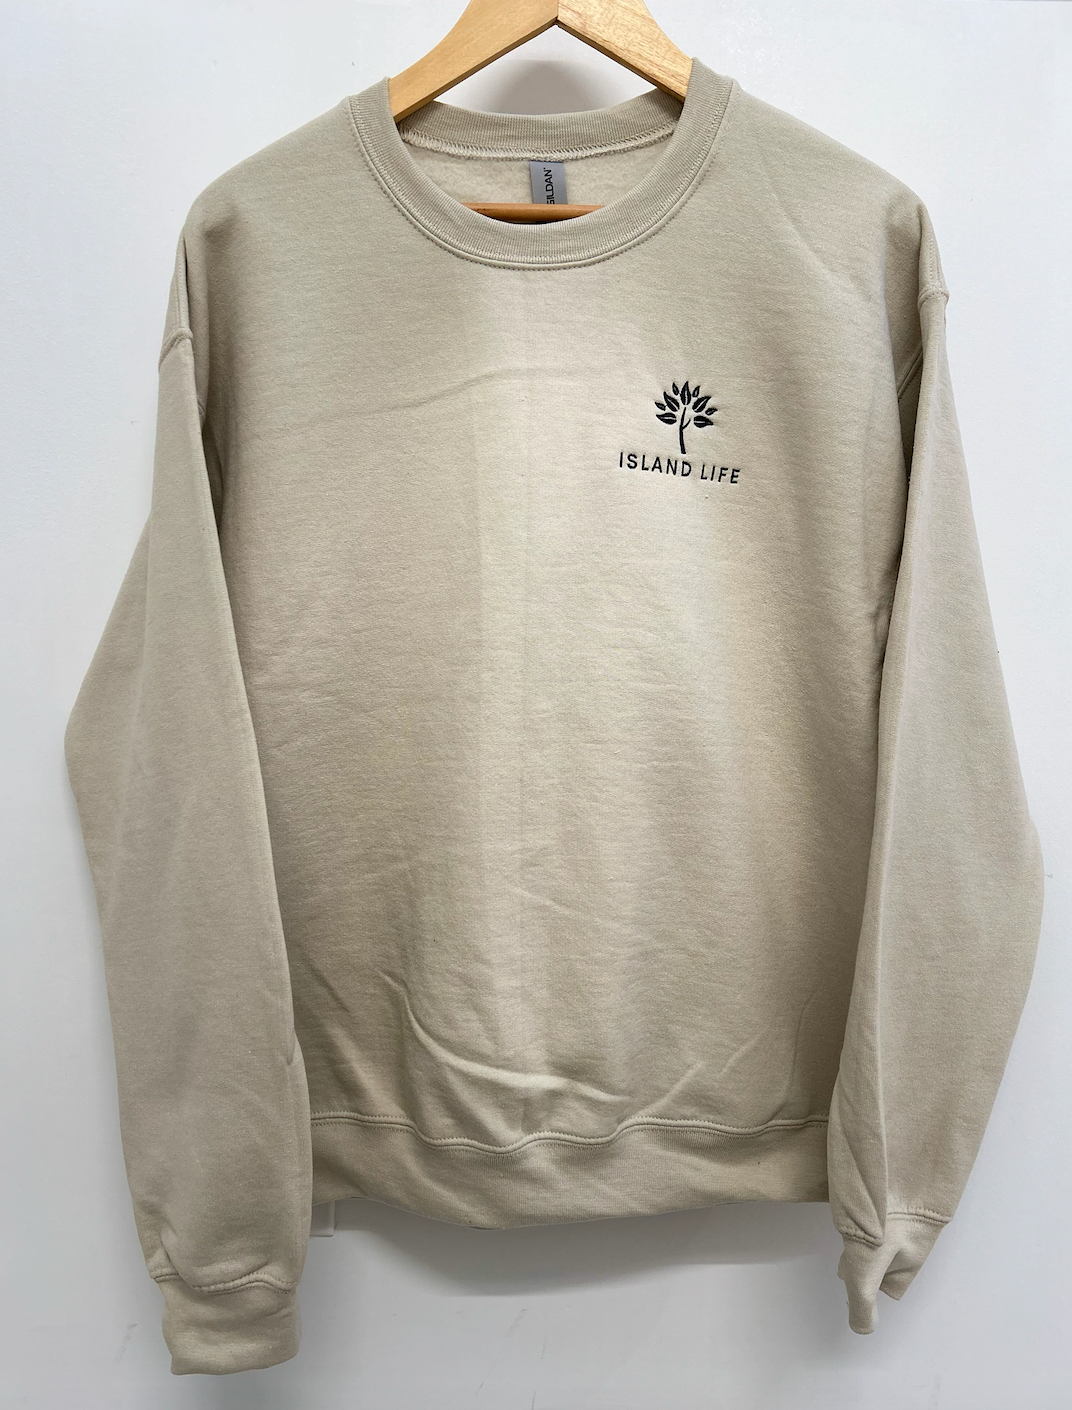 New Sweatshirts: Made with Love and Packed by Hand